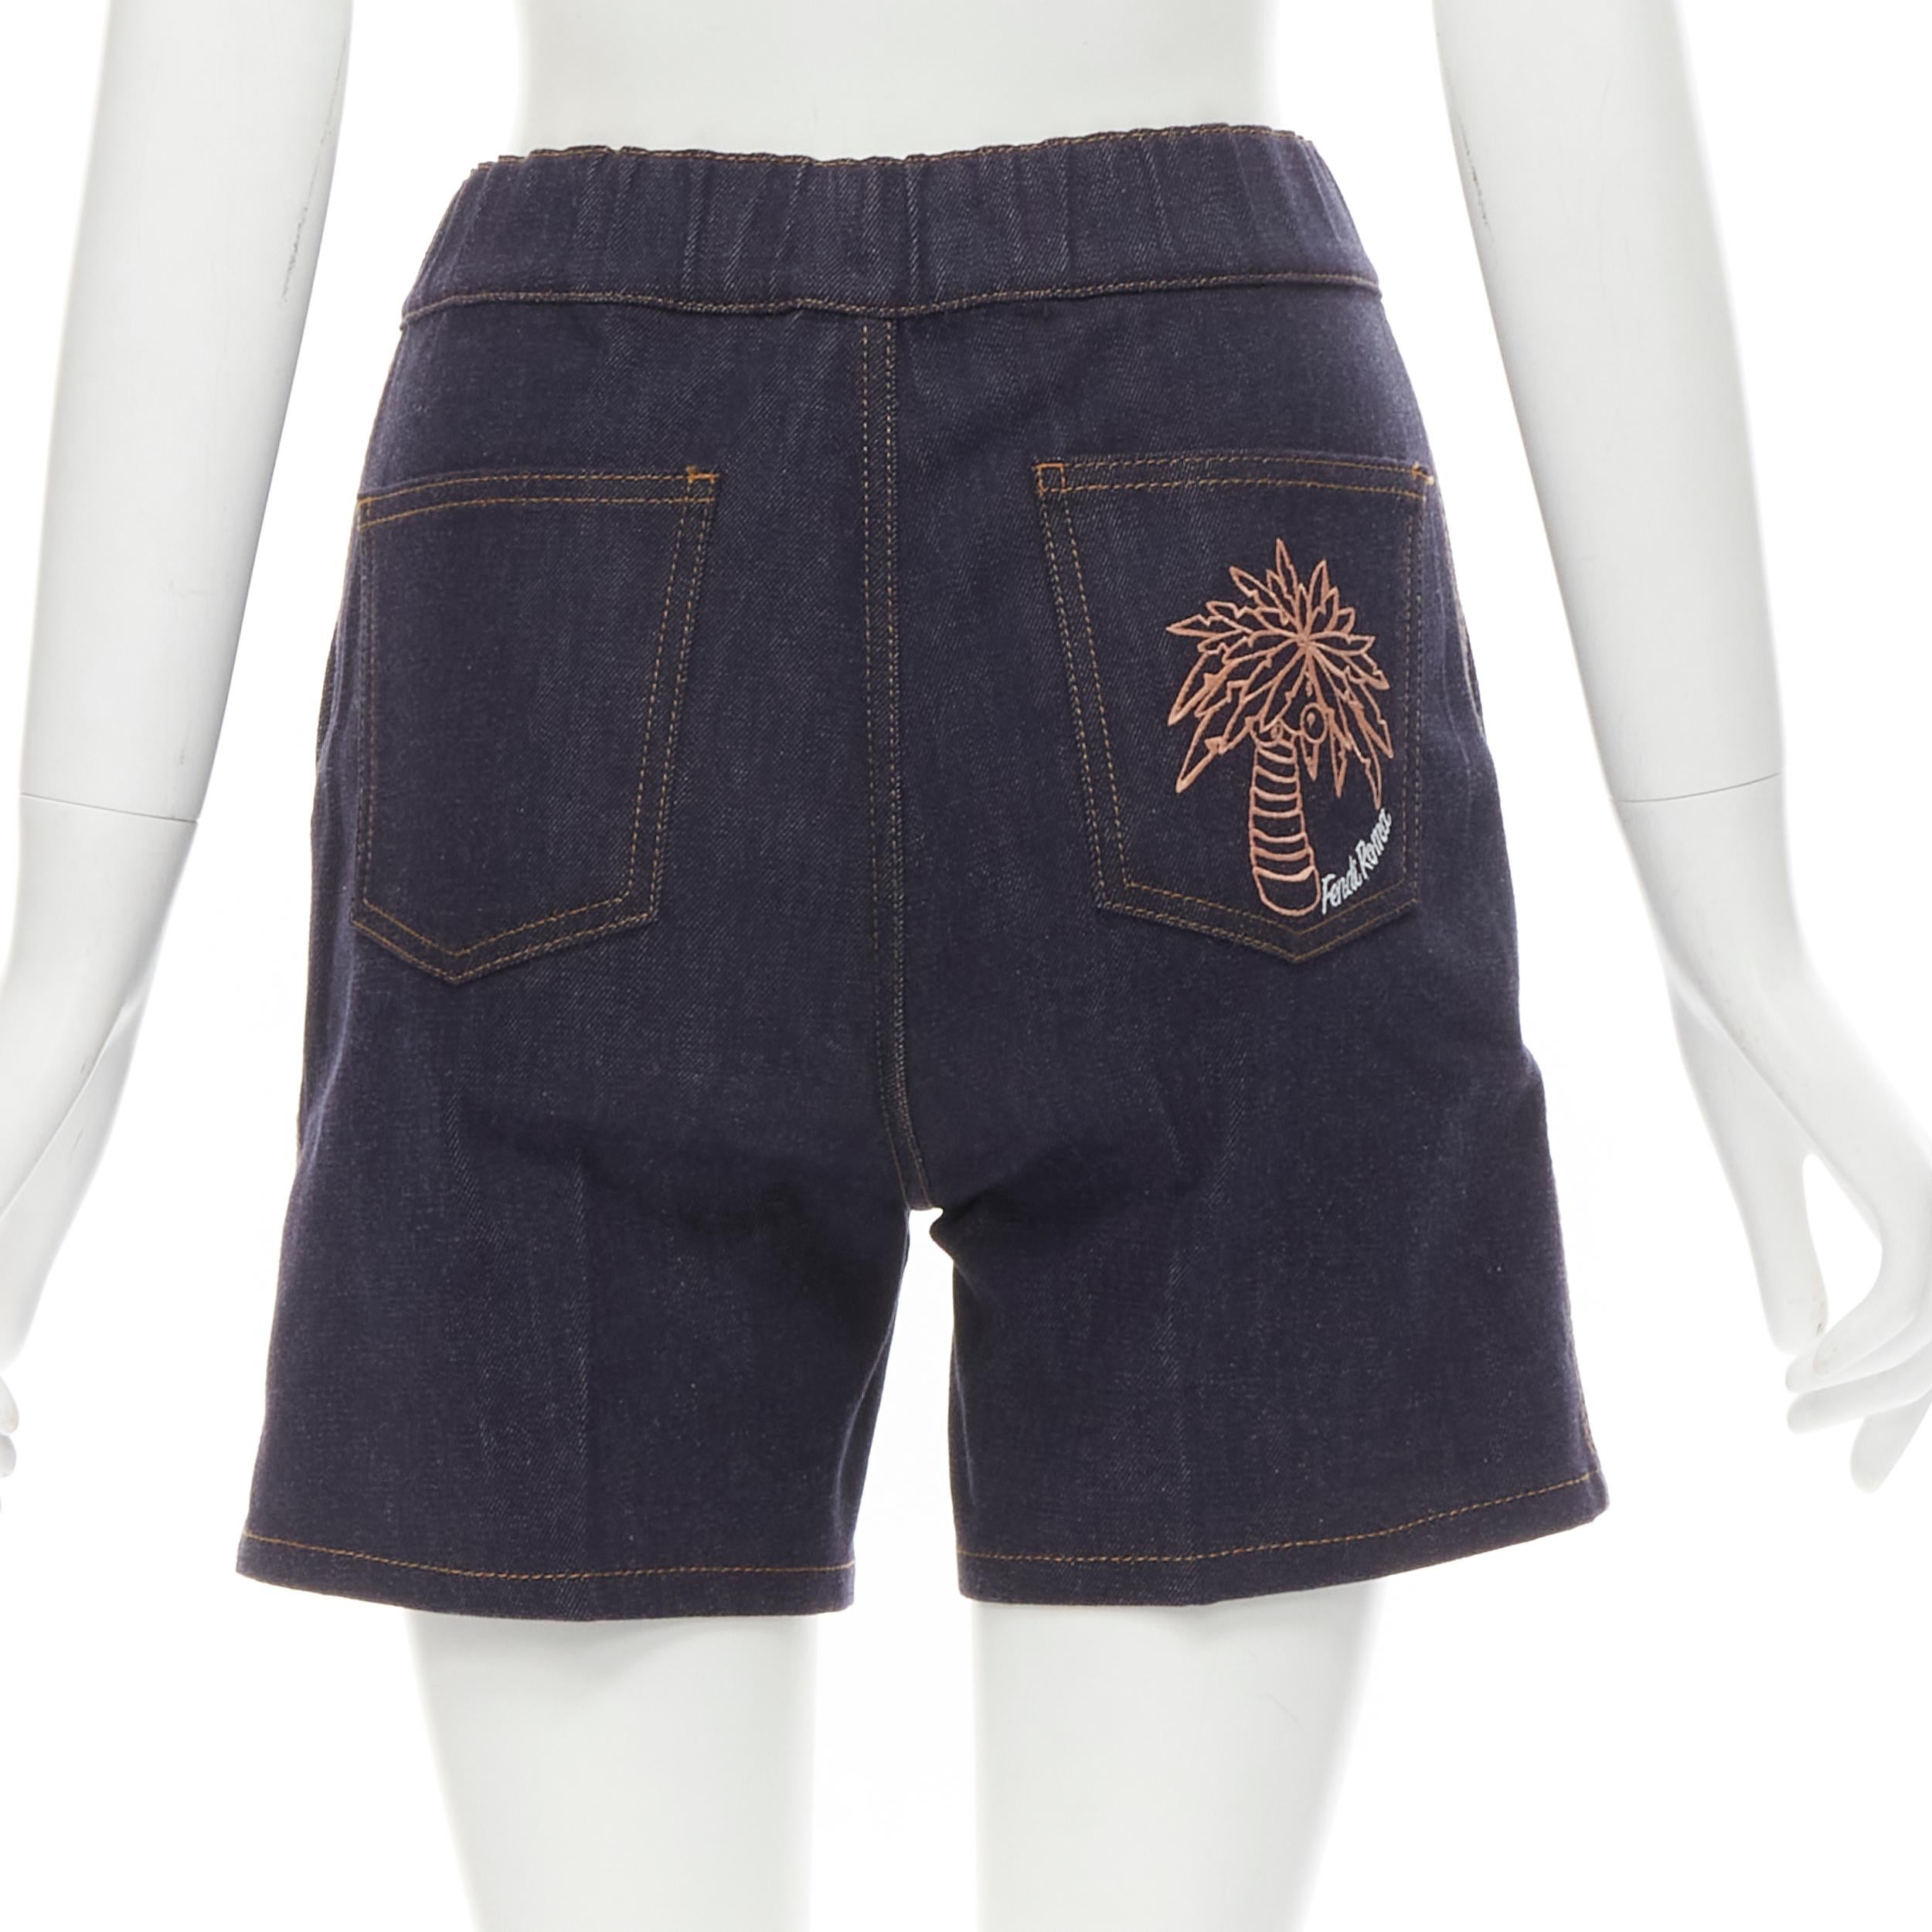 FENDI ROMA palm tree embroidered pocket dark blue denim shorts S
Brand: Fendi
Material: Feels like cotton
Color: Blue
Pattern: Solid
Closure: Zip
Extra Detail: Circle F button. Zip fly. 4-pocket design.

CONDITION:
Condition: Excellent, this item